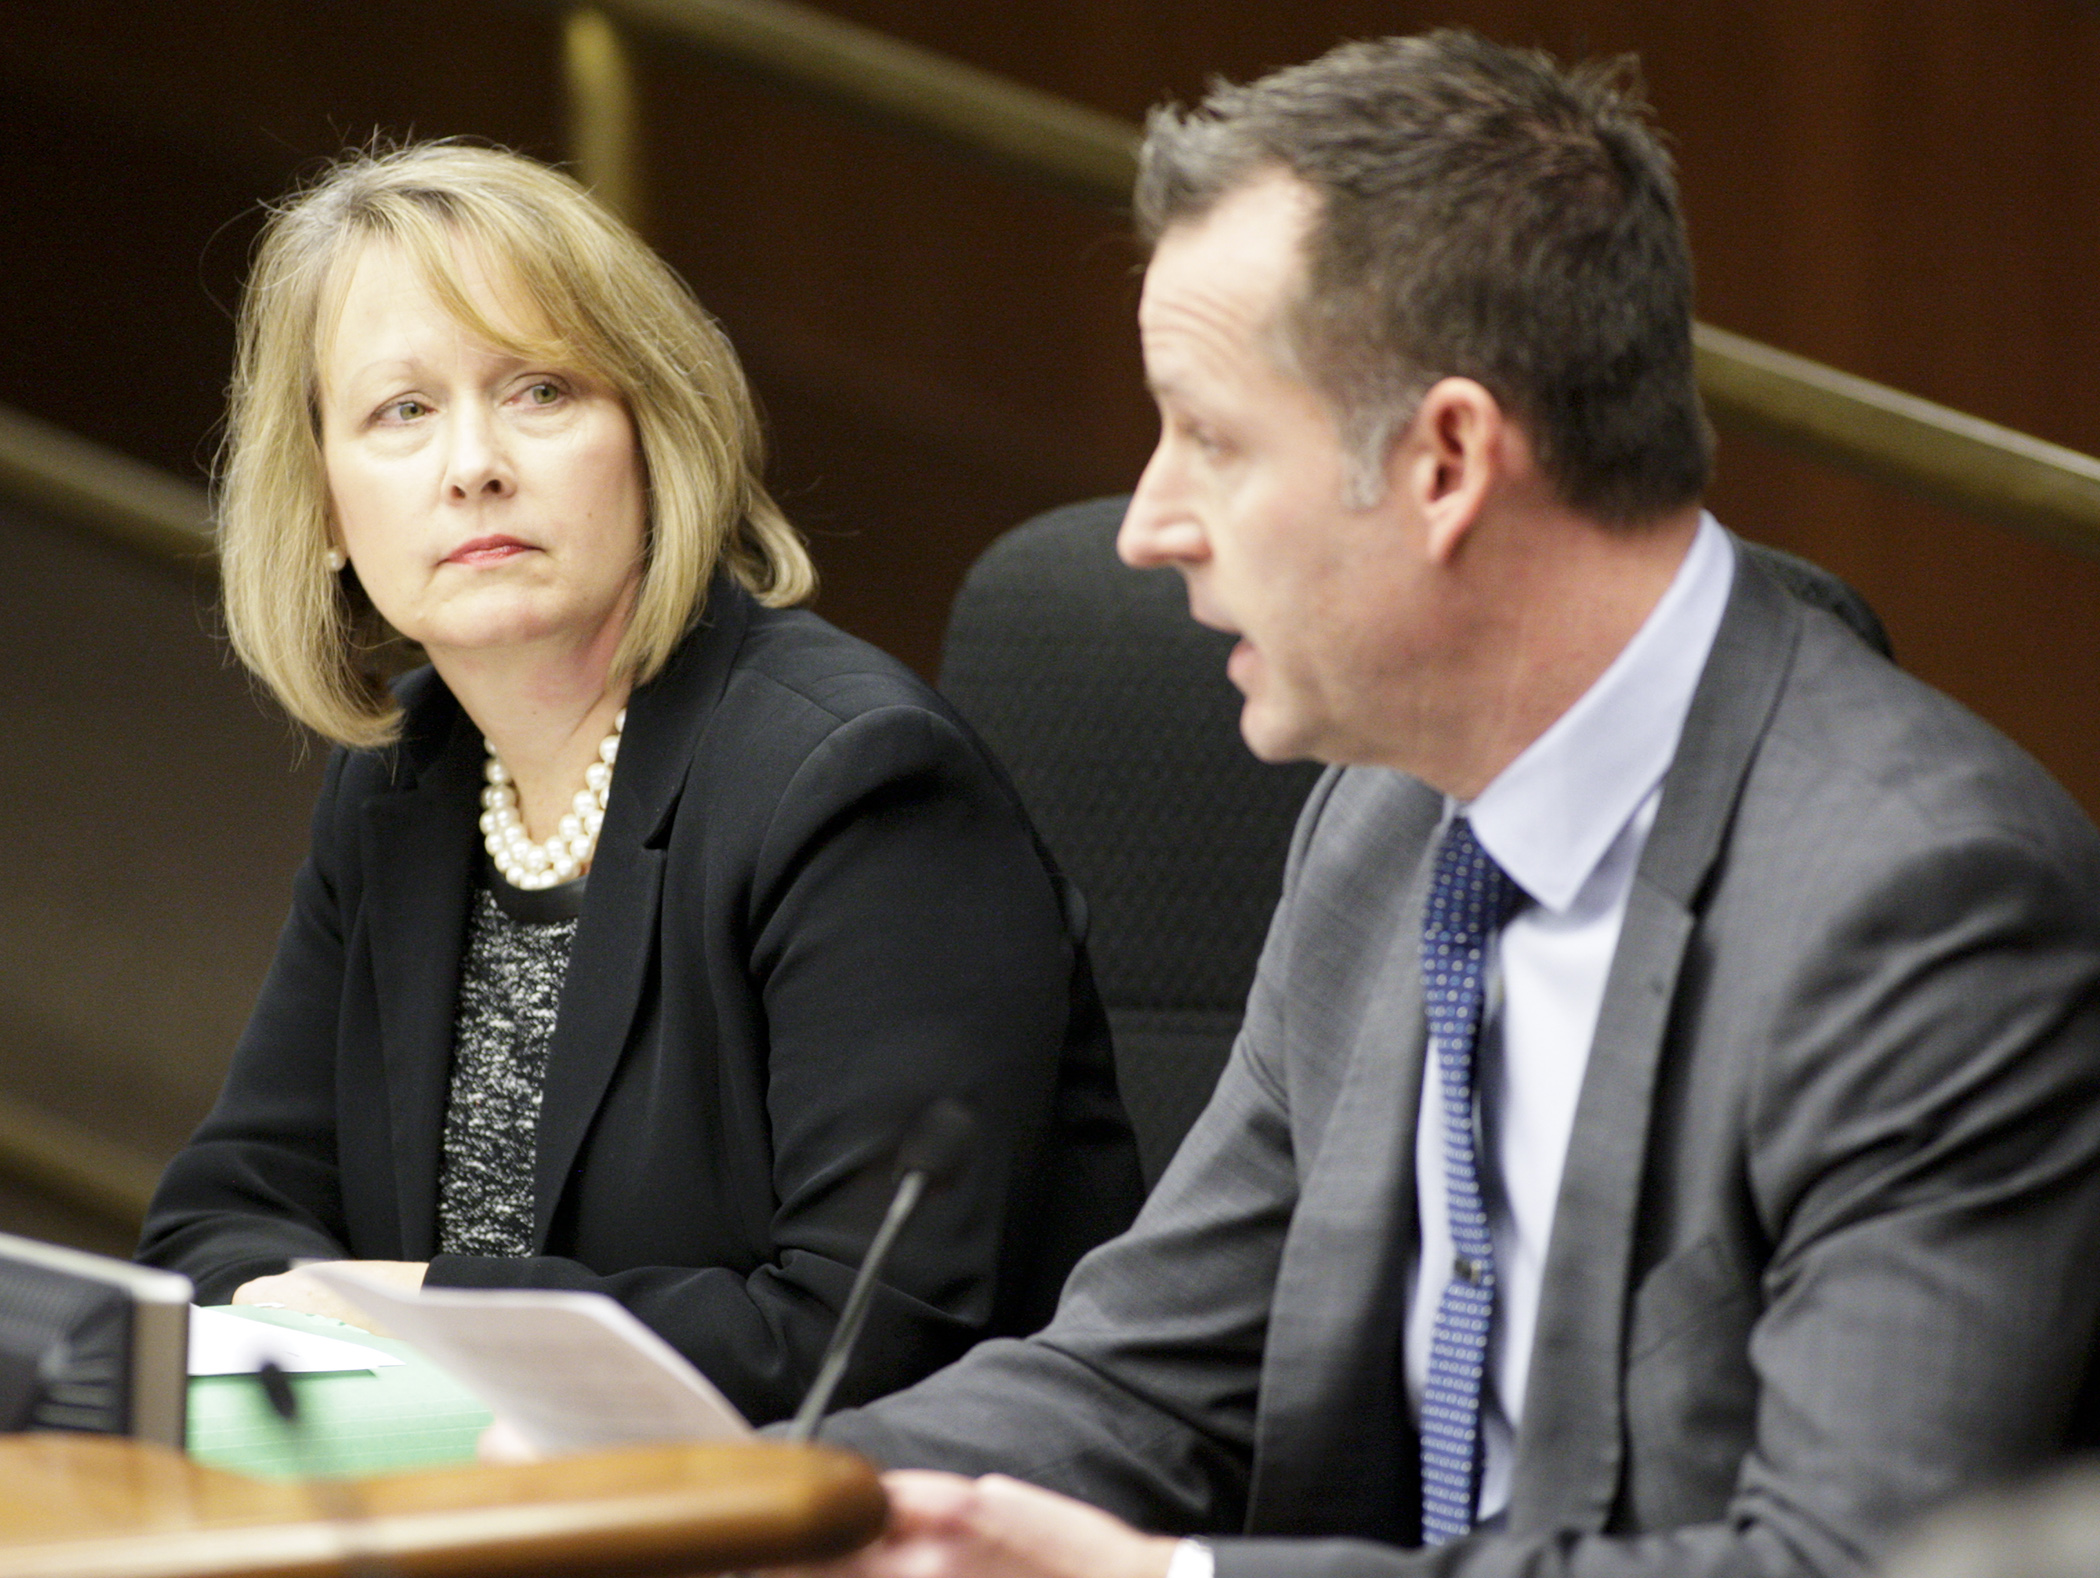 
Rep. Jenifer Loon listens during the Jan. 17 meeting of the House Commerce and Regulatory Reform Committee as Tony Chesak, executive director of the Minnesota Licensed Beverage Association, testifies against her bill HF30, which would permit Sunday liquors sales. Photo by Paul Battaglia